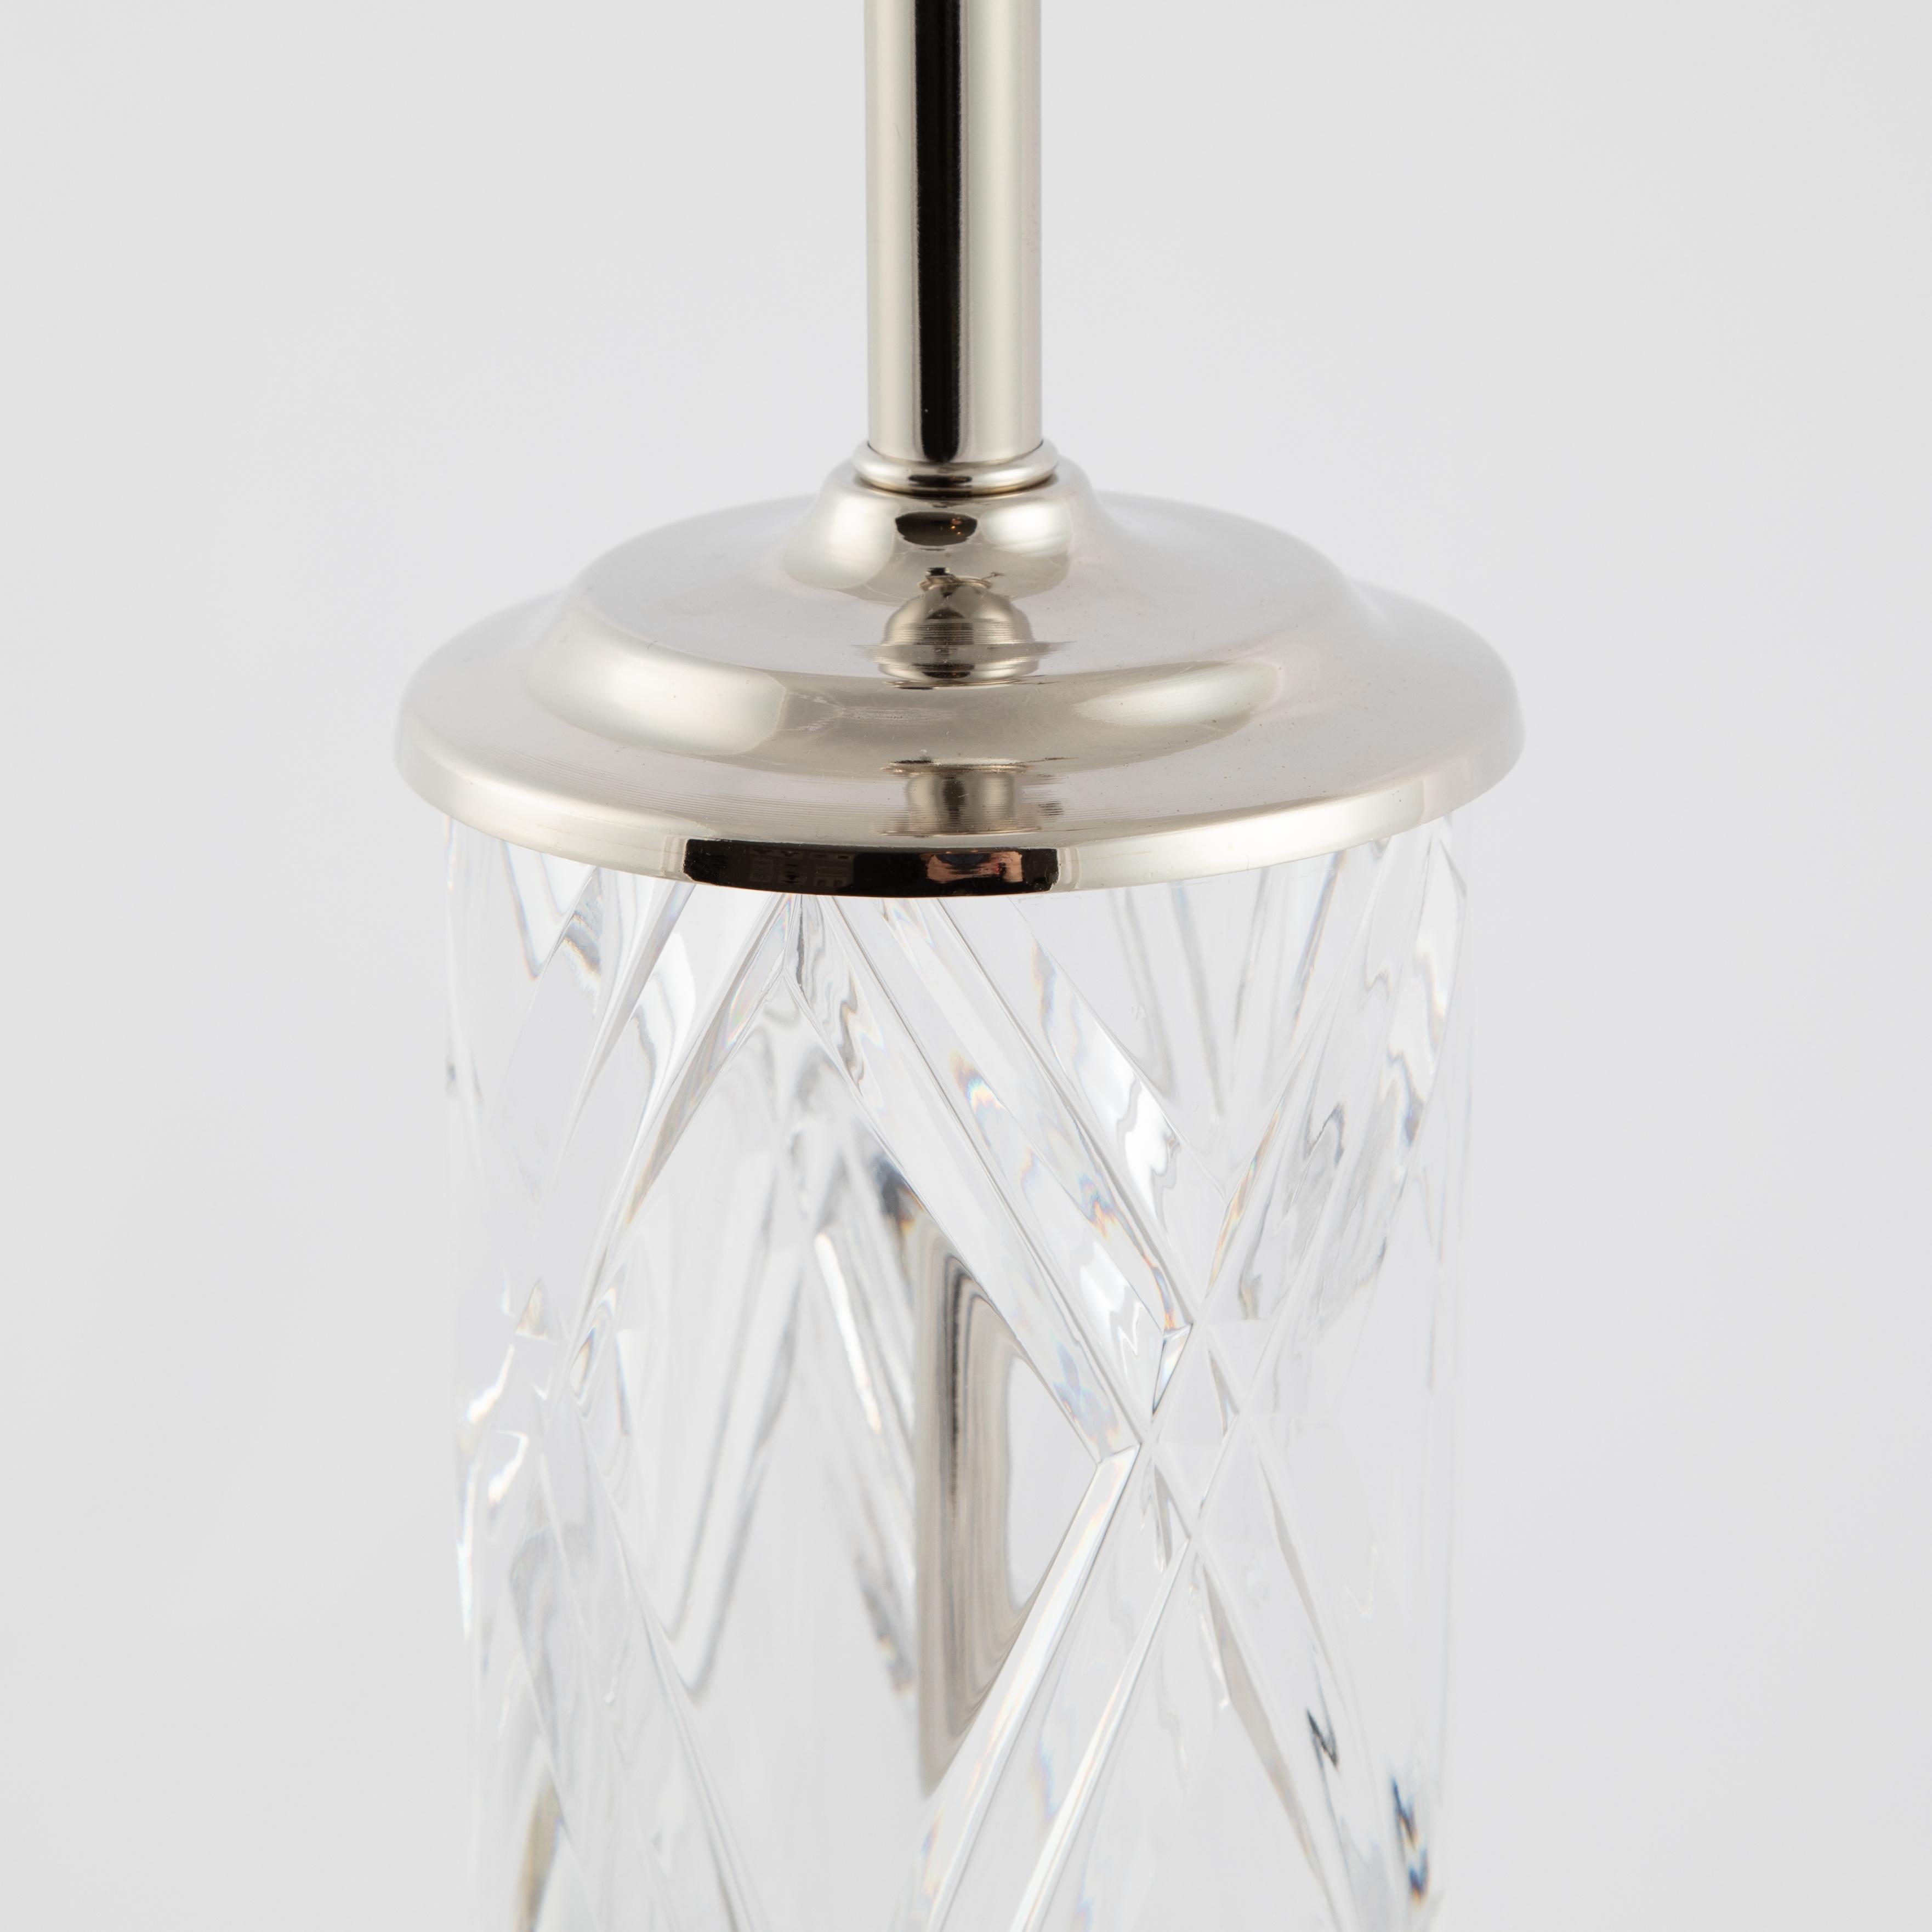 Swedish Olle Alberius for Orrefors Handcut Crystal Table Lamps, circa 1970s For Sale